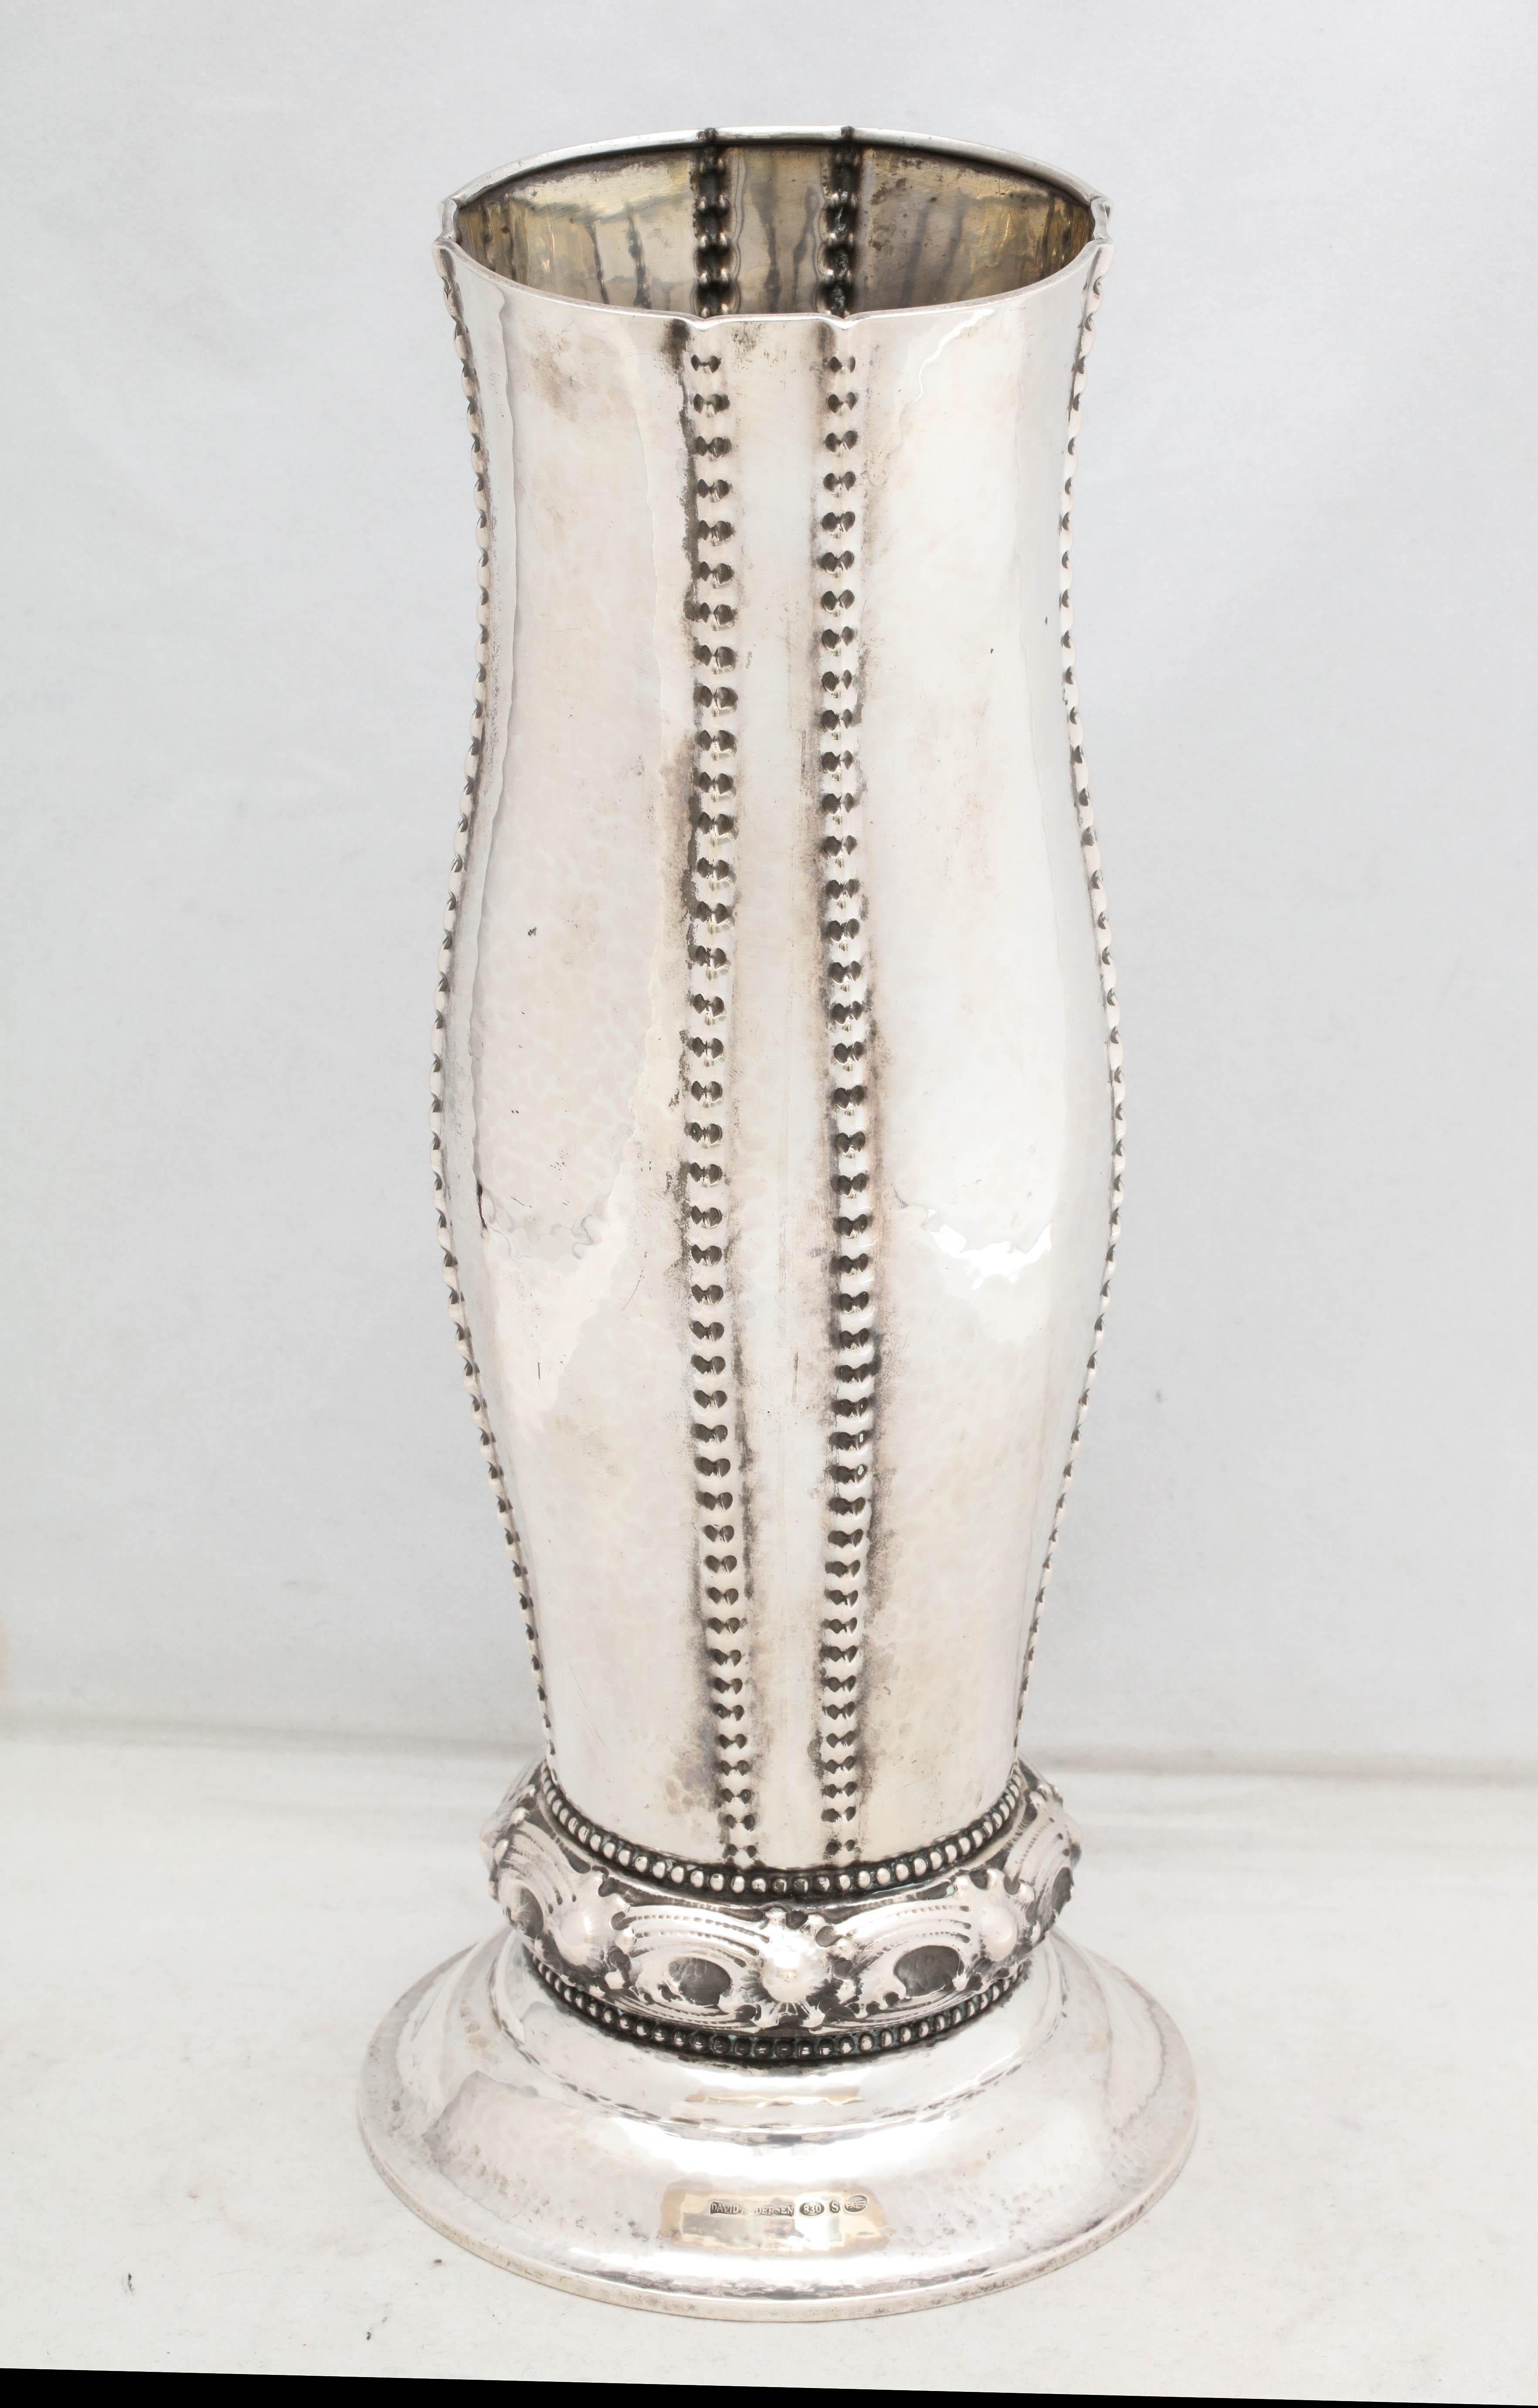 Art Deco, Continental silver (.830) vase, Norway, circa 1915, David Andersen - maker. Hammered silver is decorated with beaded design. Measures 11 1/4 inches high x 5 inches diameter across base (widest point) x 3 1/2 diameter across opening. Weighs